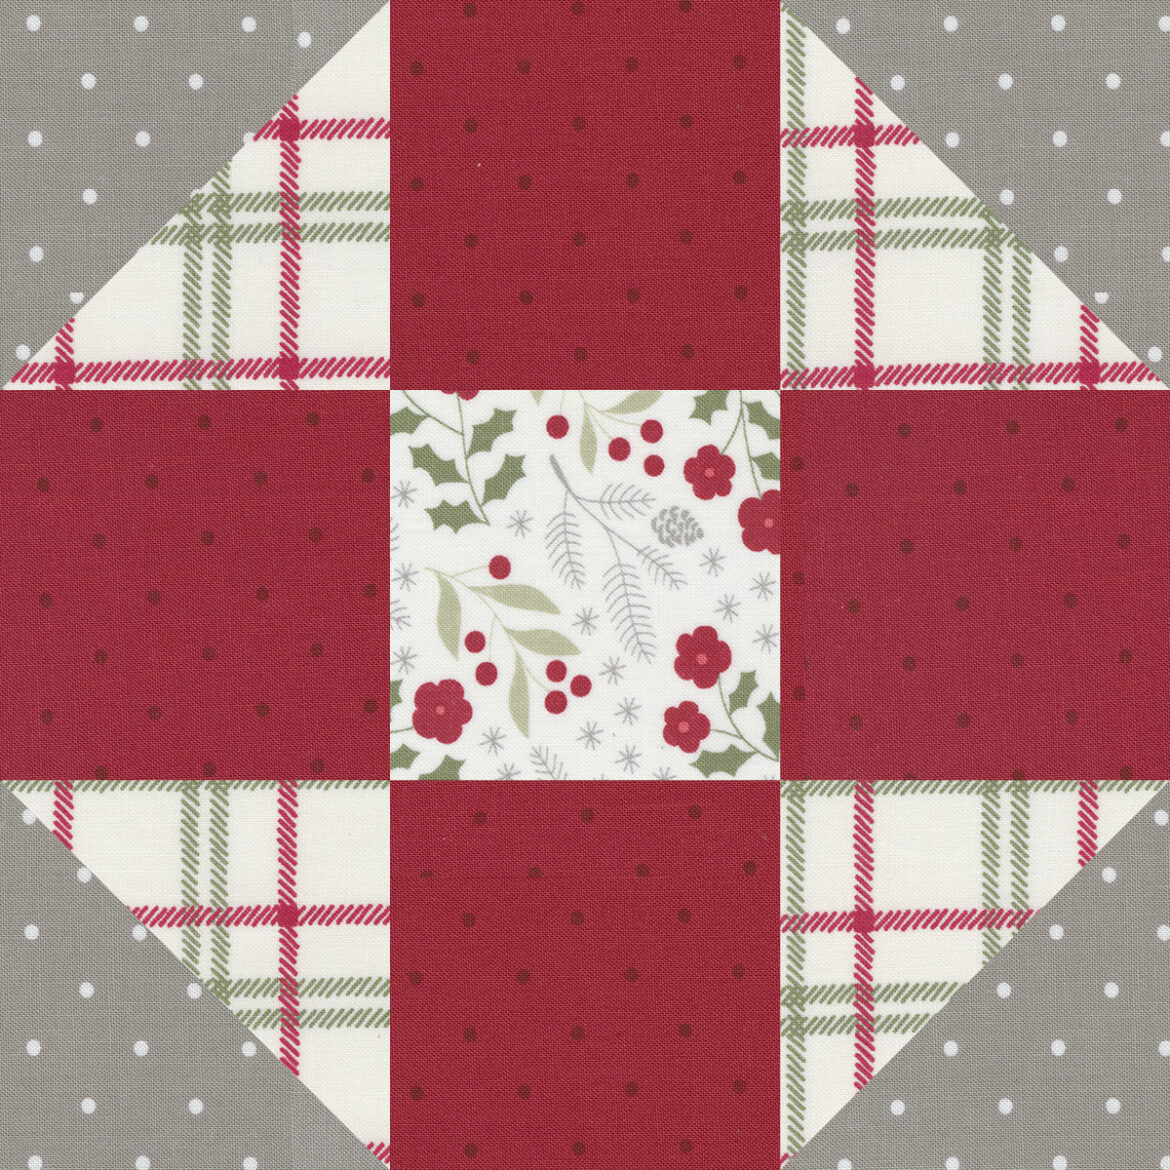 Sewcialites 2 Block 21 "Dapper" by Jane Davidson of Quilt Jane. Fabric is Christmas Eve by Lella Boutique for Moda Fabrics. Download the free PDF pattern here